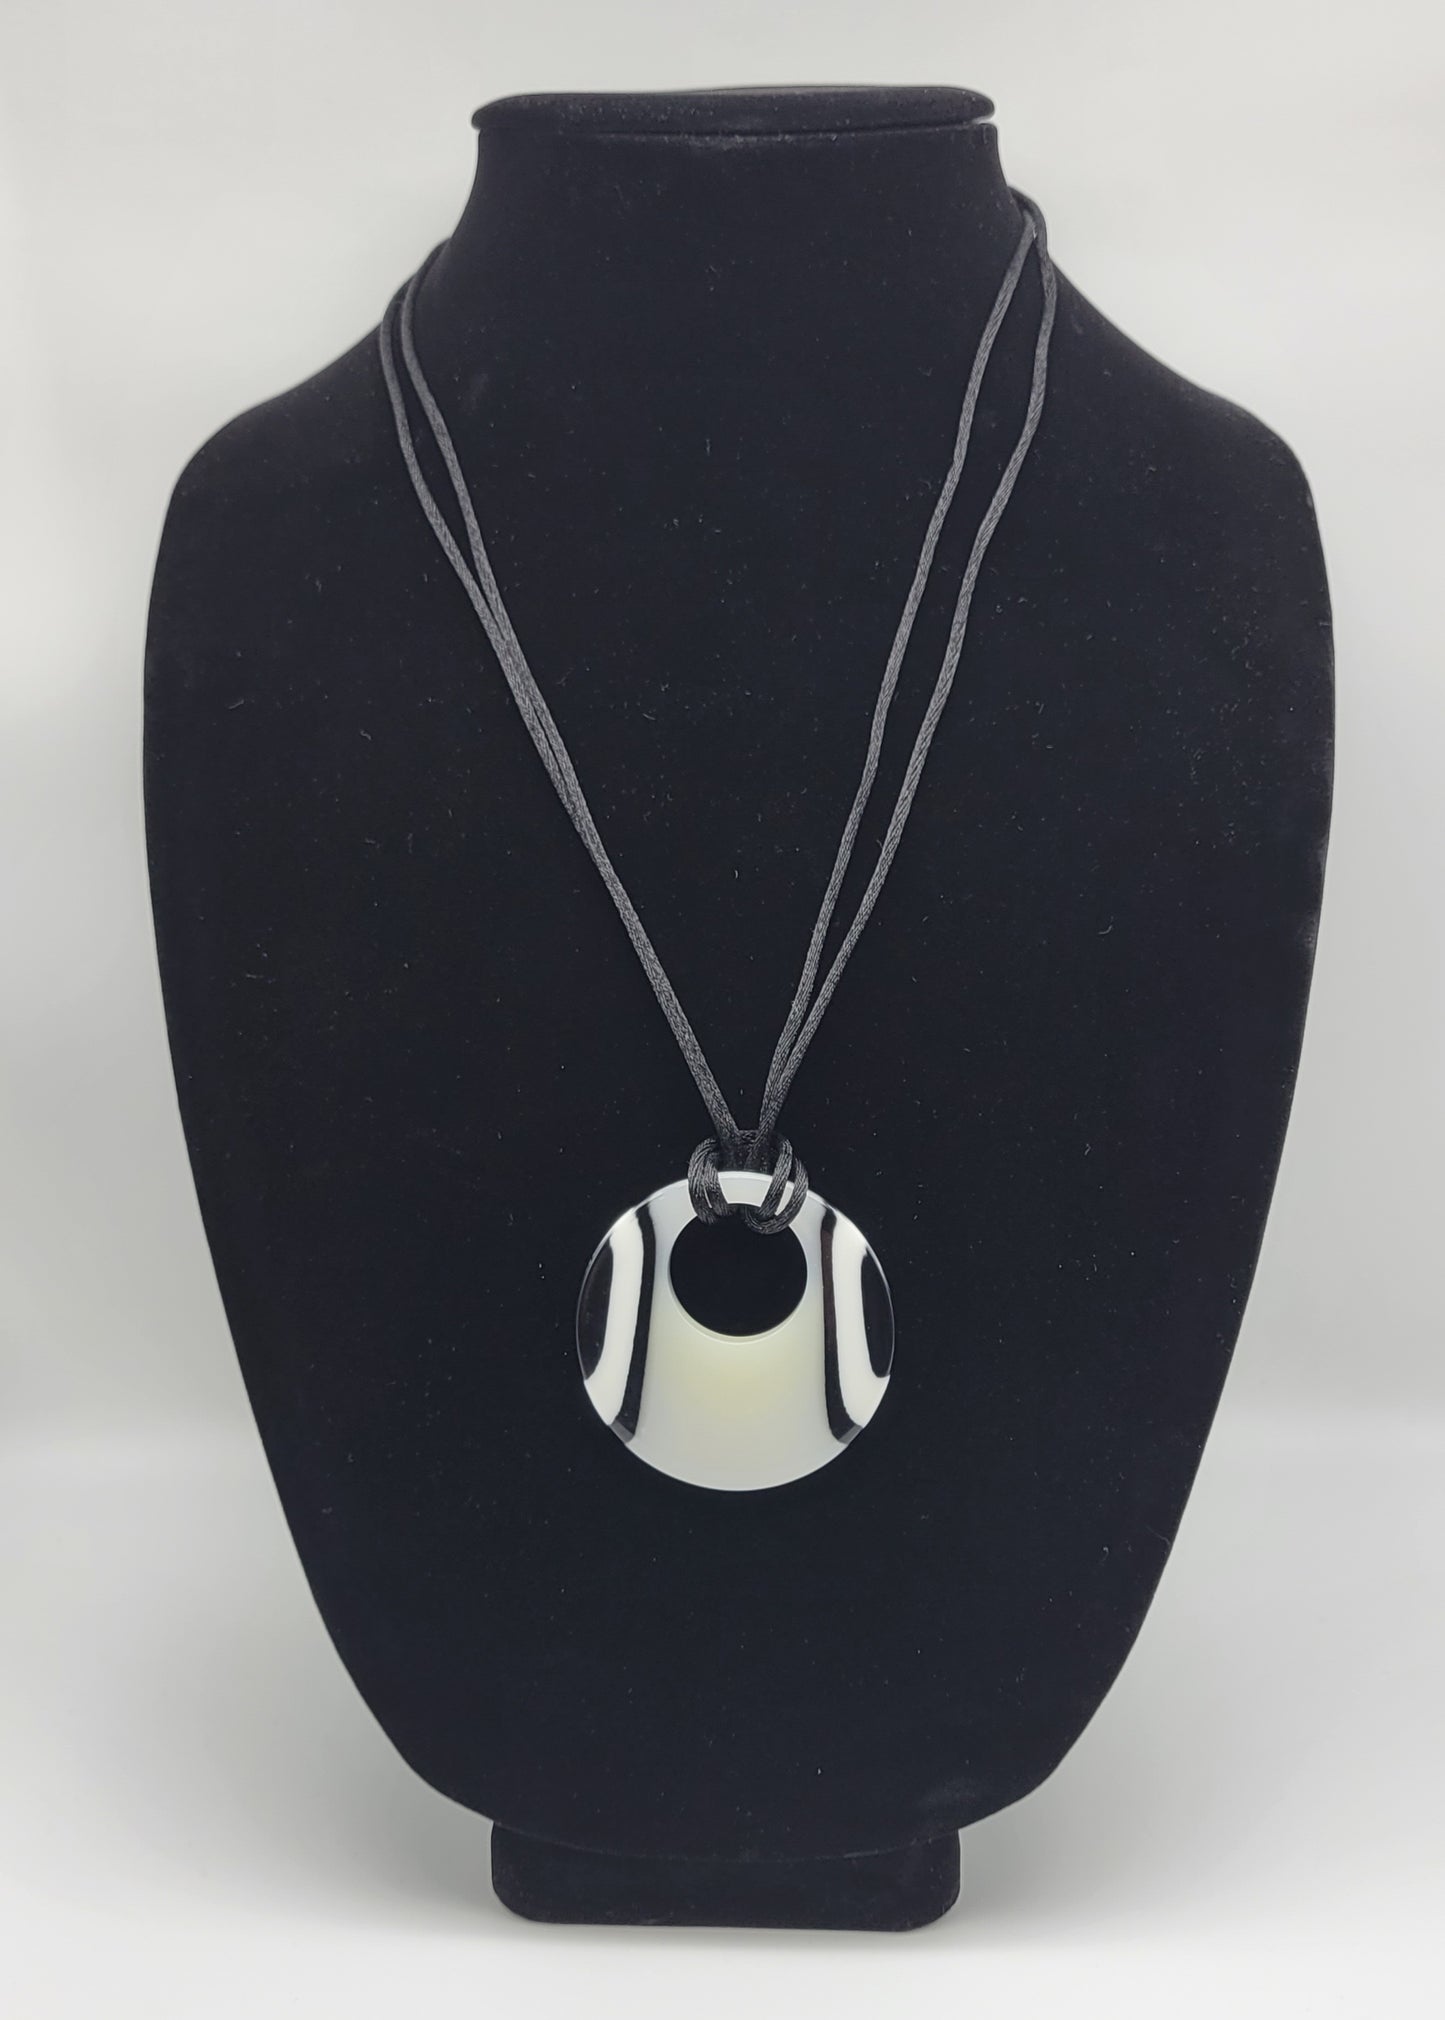 "Black and White Disc" Necklace